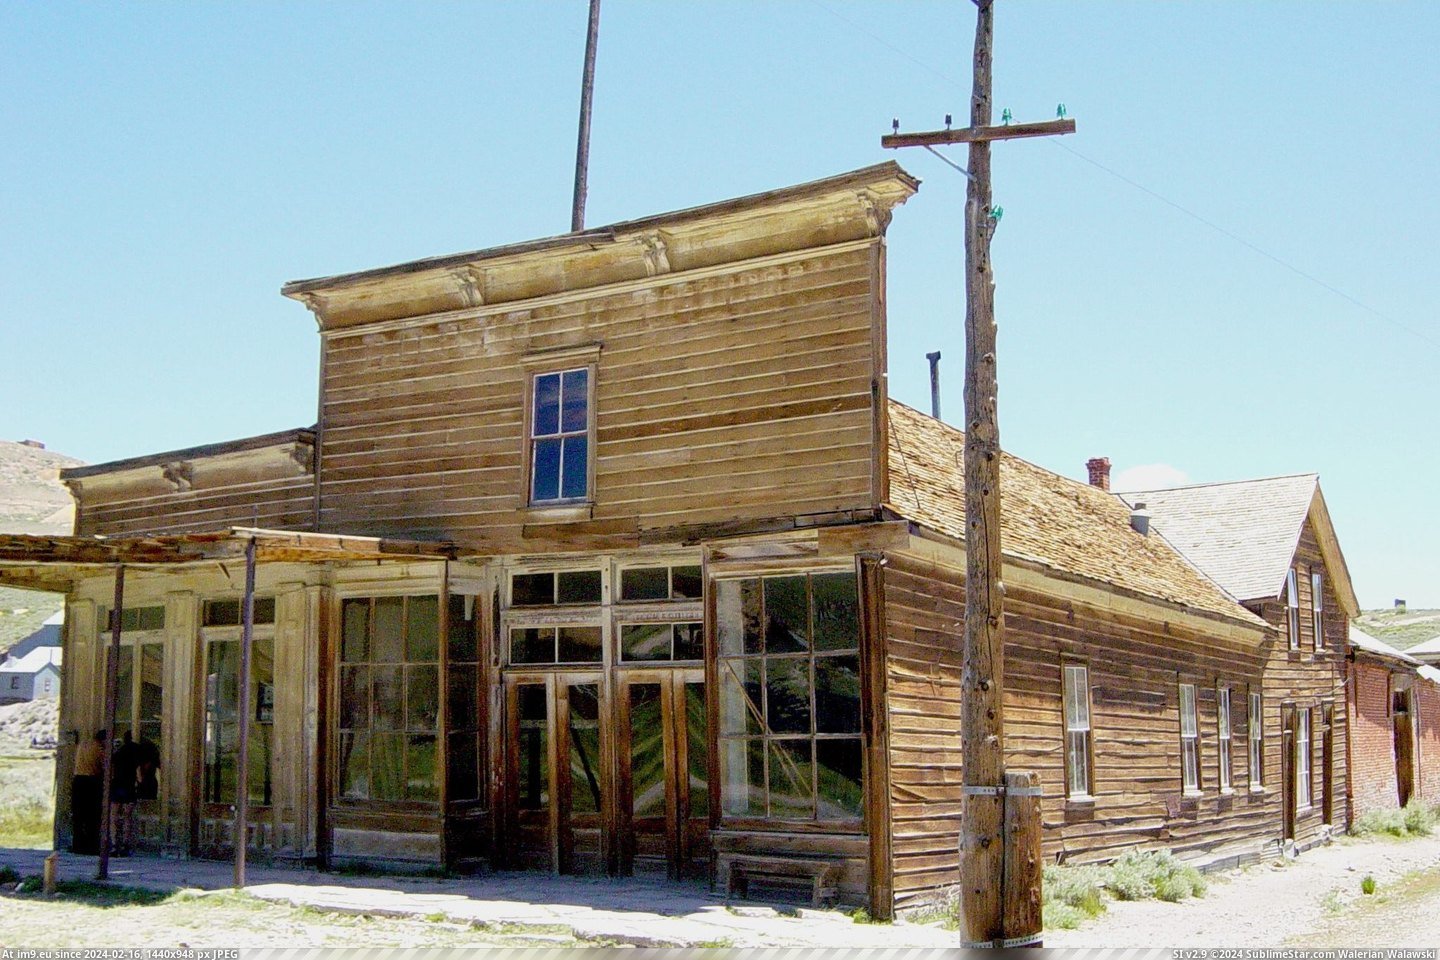 Wheaton And Hollis Hotel And Bodie Store In Bodie, California (in Bodie - a ghost town in Eastern California)